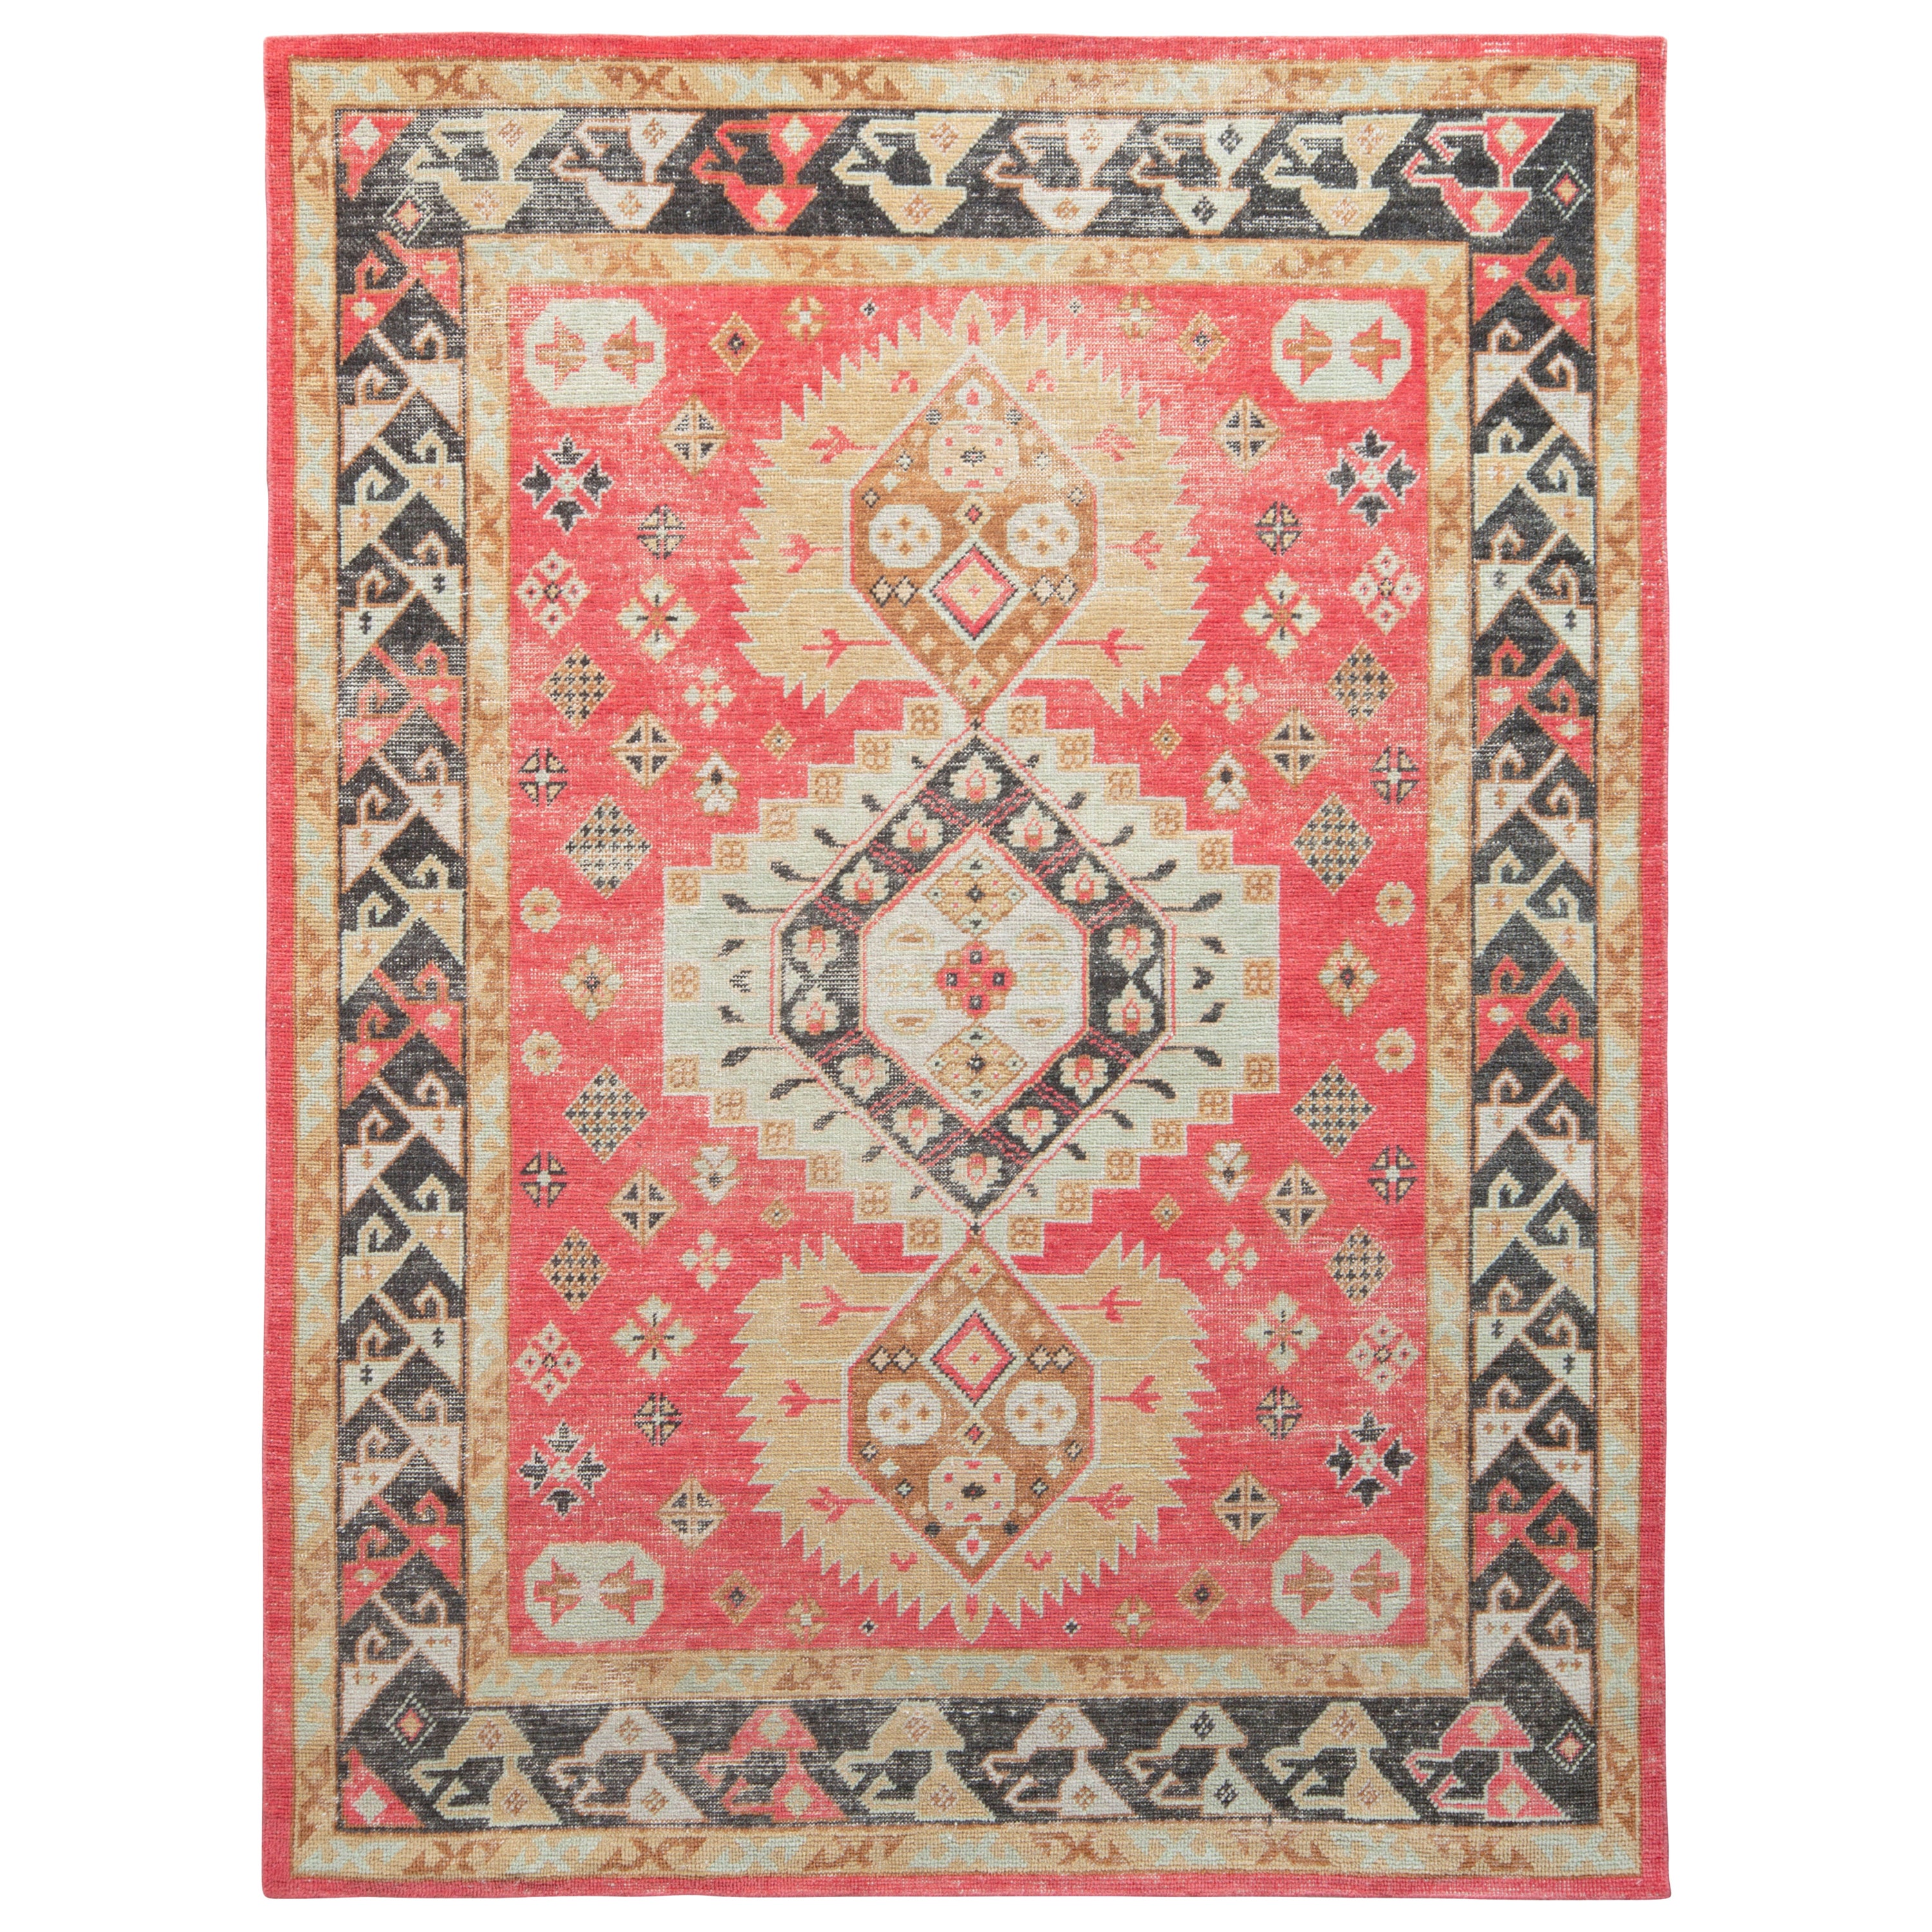 Rug & Kilim’s Distressed Classic Style Rug in Red, Beige-Brown Medallion Pattern For Sale